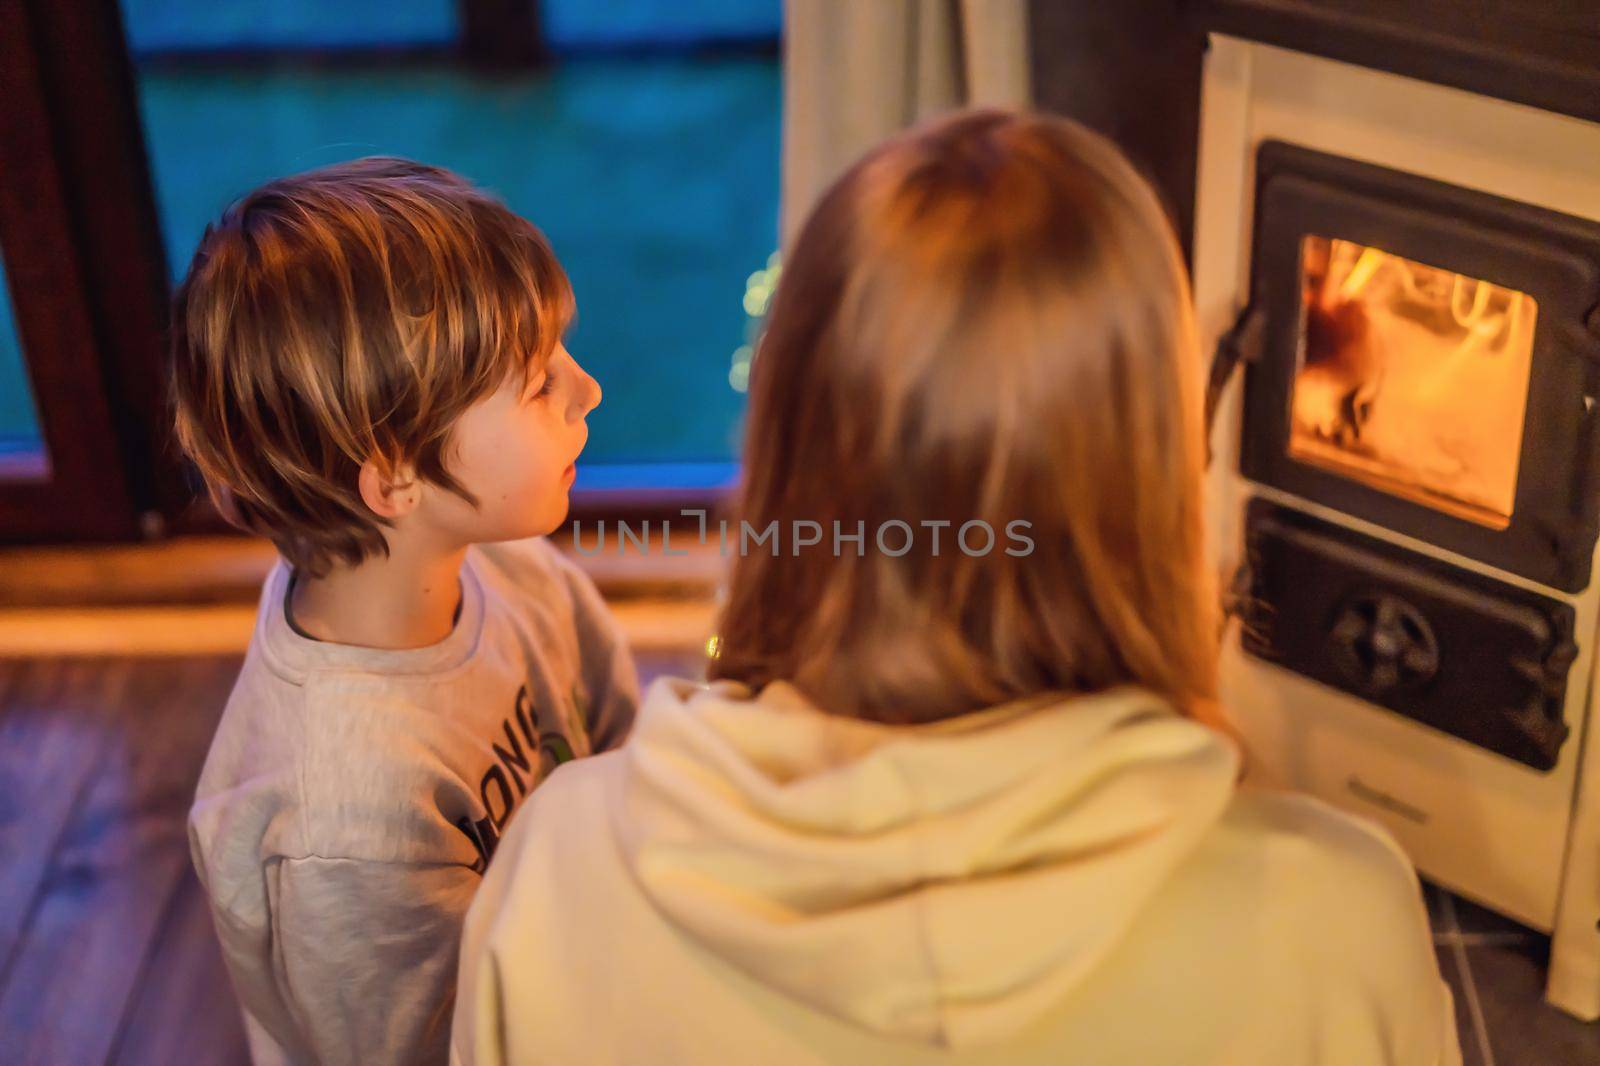 Mom and son spend time by the fireplace in Glamping. Rest in the mountains in Glamping. Cozy fireplace in a mountain house.